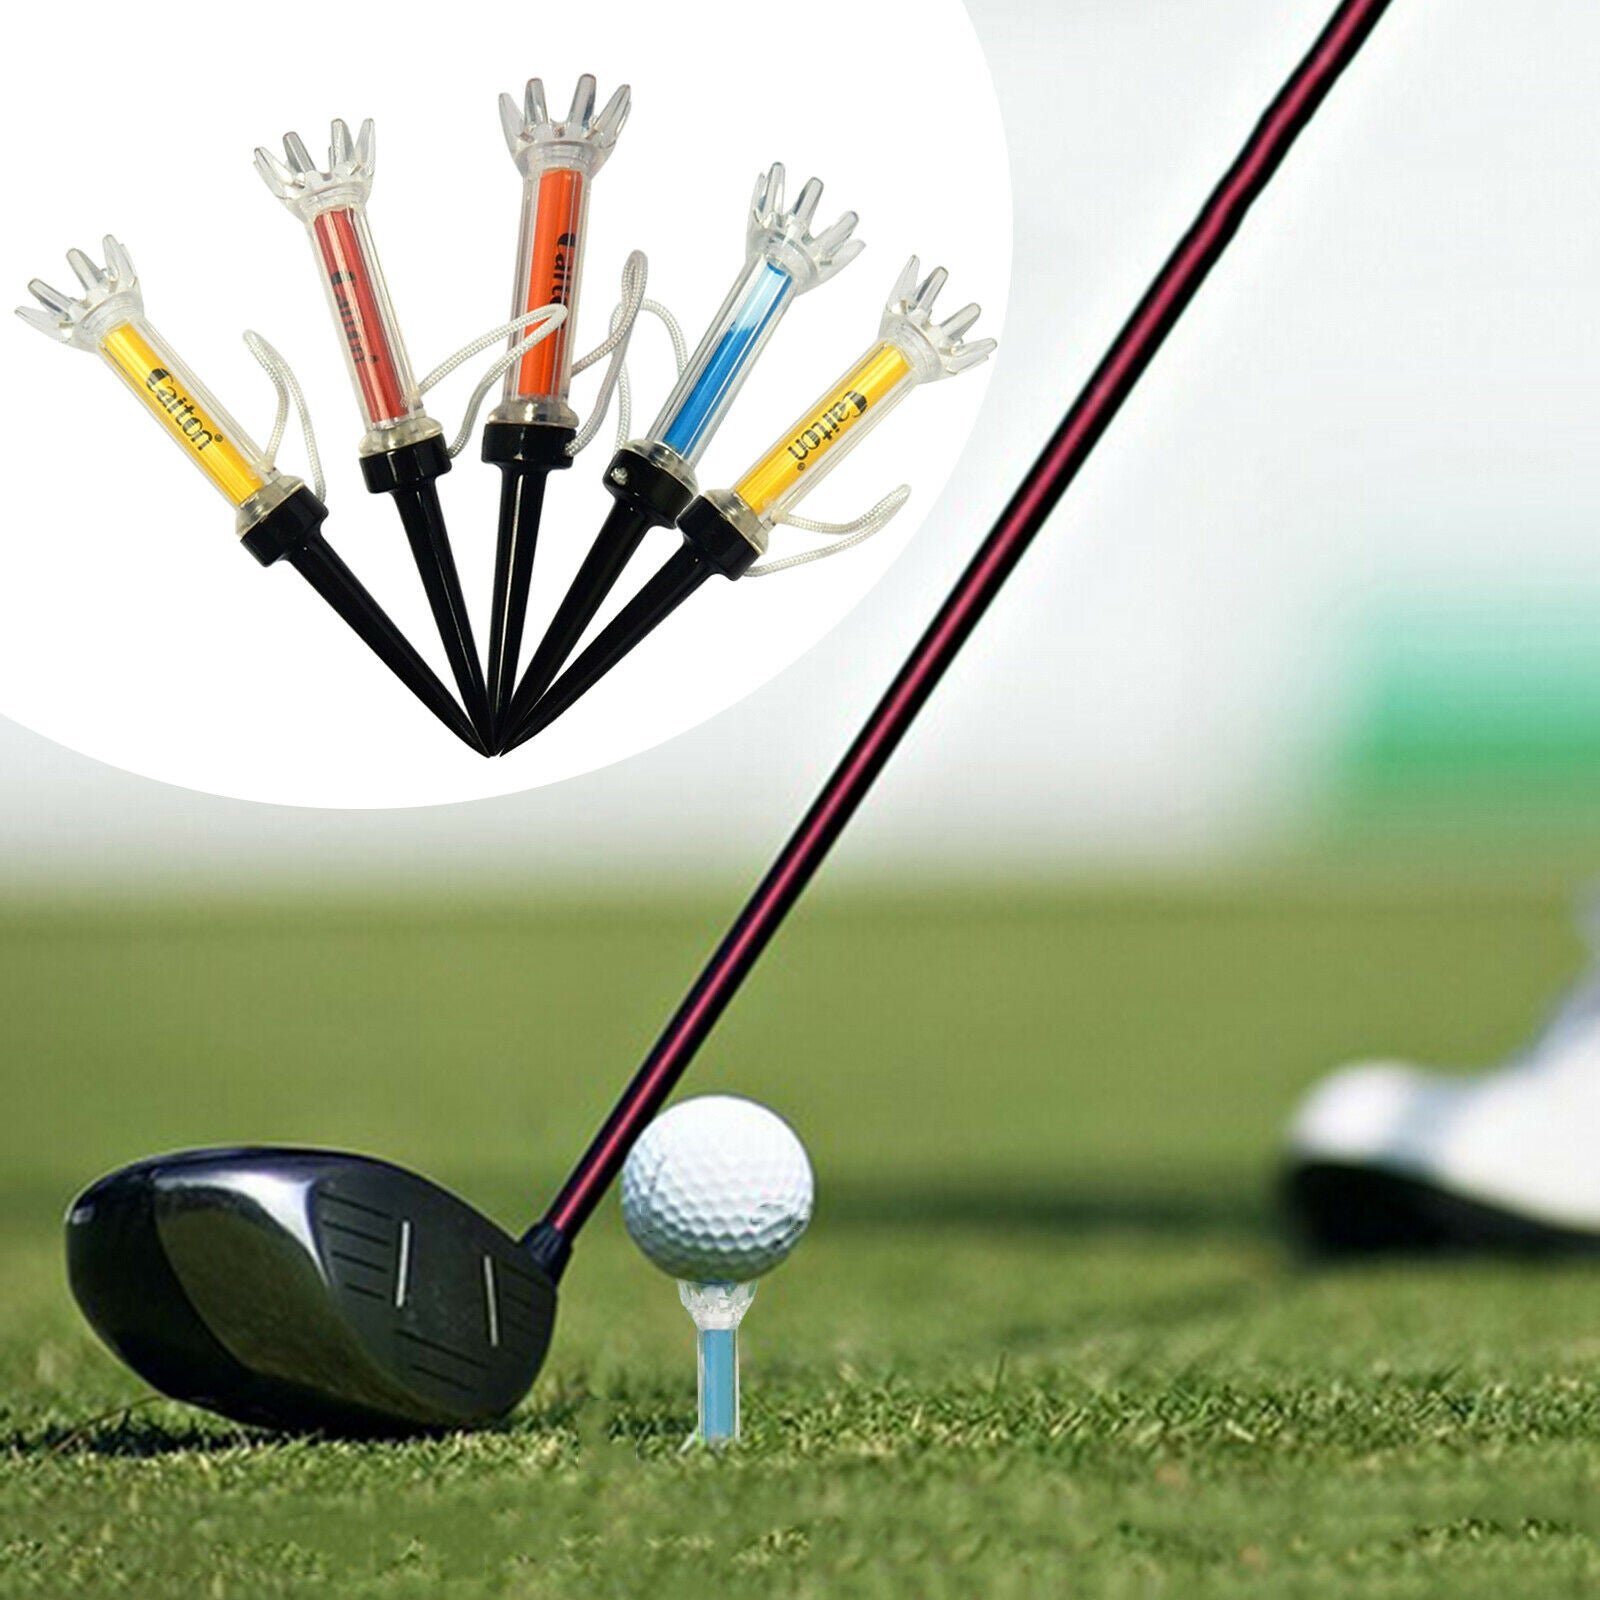 5x 90mm Plastic Magnetic Golf Tee 8 Claw Practicing Tees Golfer Training Aid